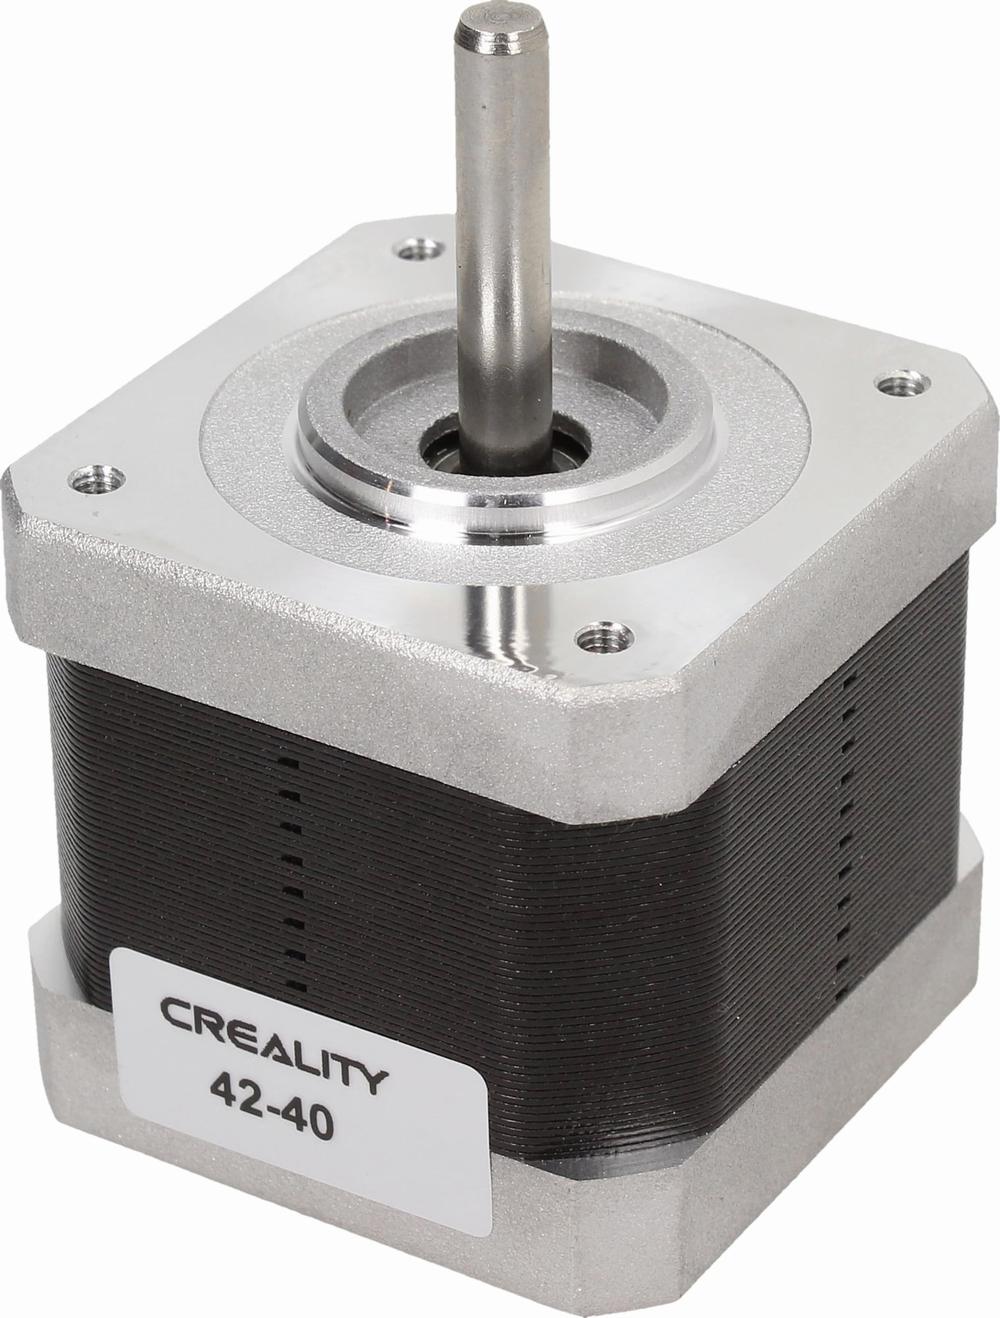 A silver and black stepper motor with a label that says Creality 42-40.